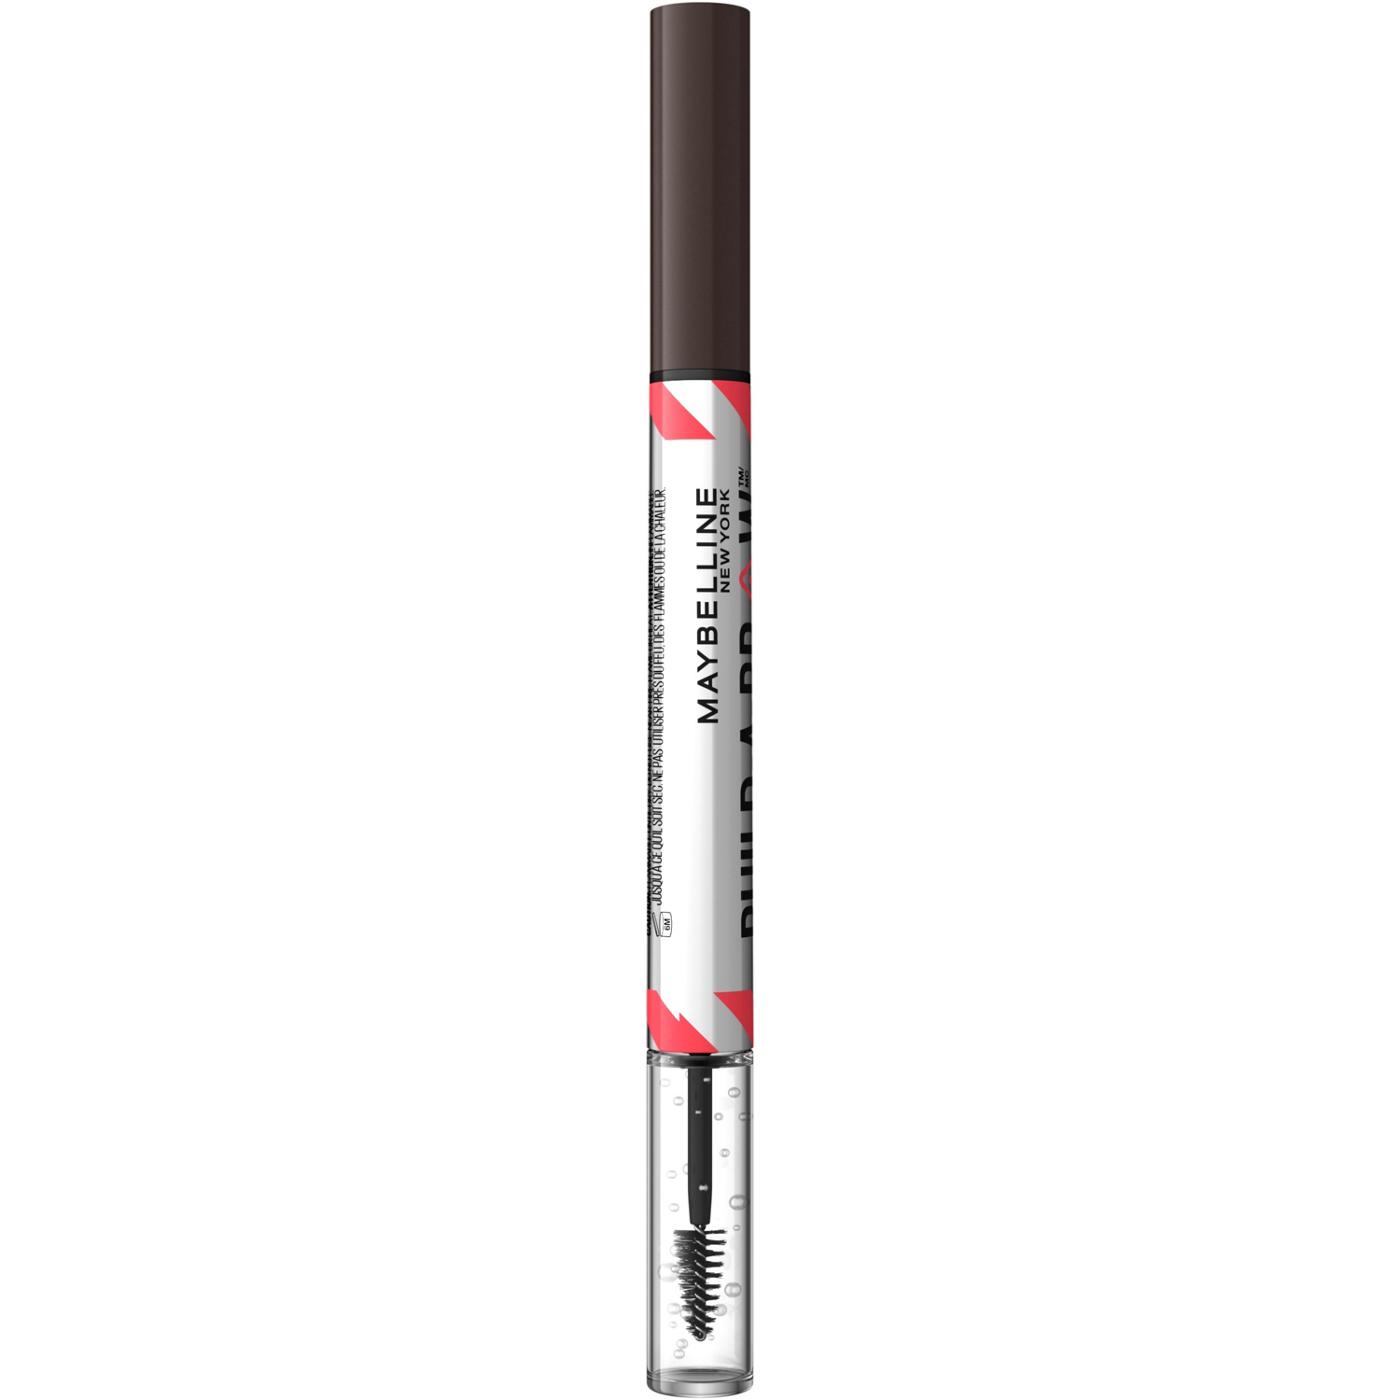 Maybelline Build A Brow 2 In 1 Brow Pen - Ash Brown; image 11 of 17